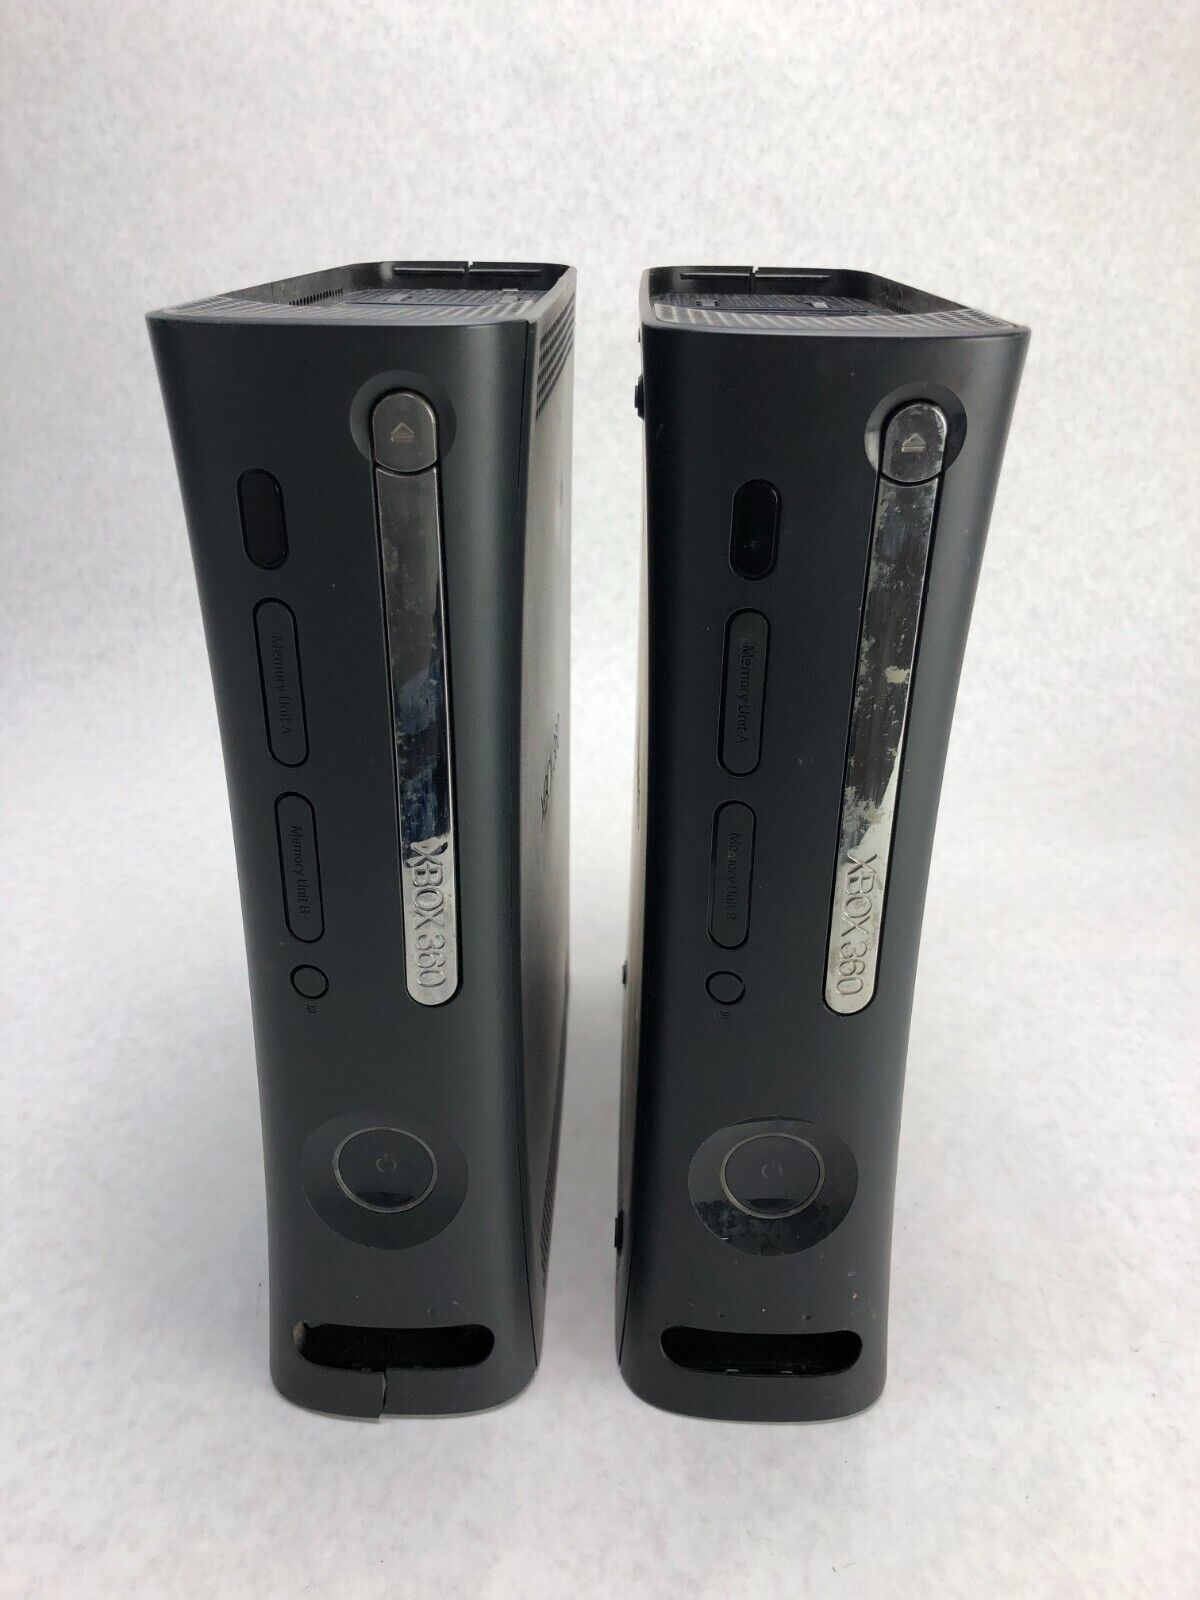 Lot of 2 Microsoft Xbox 360 Black Console Only - Bad Disc Drives